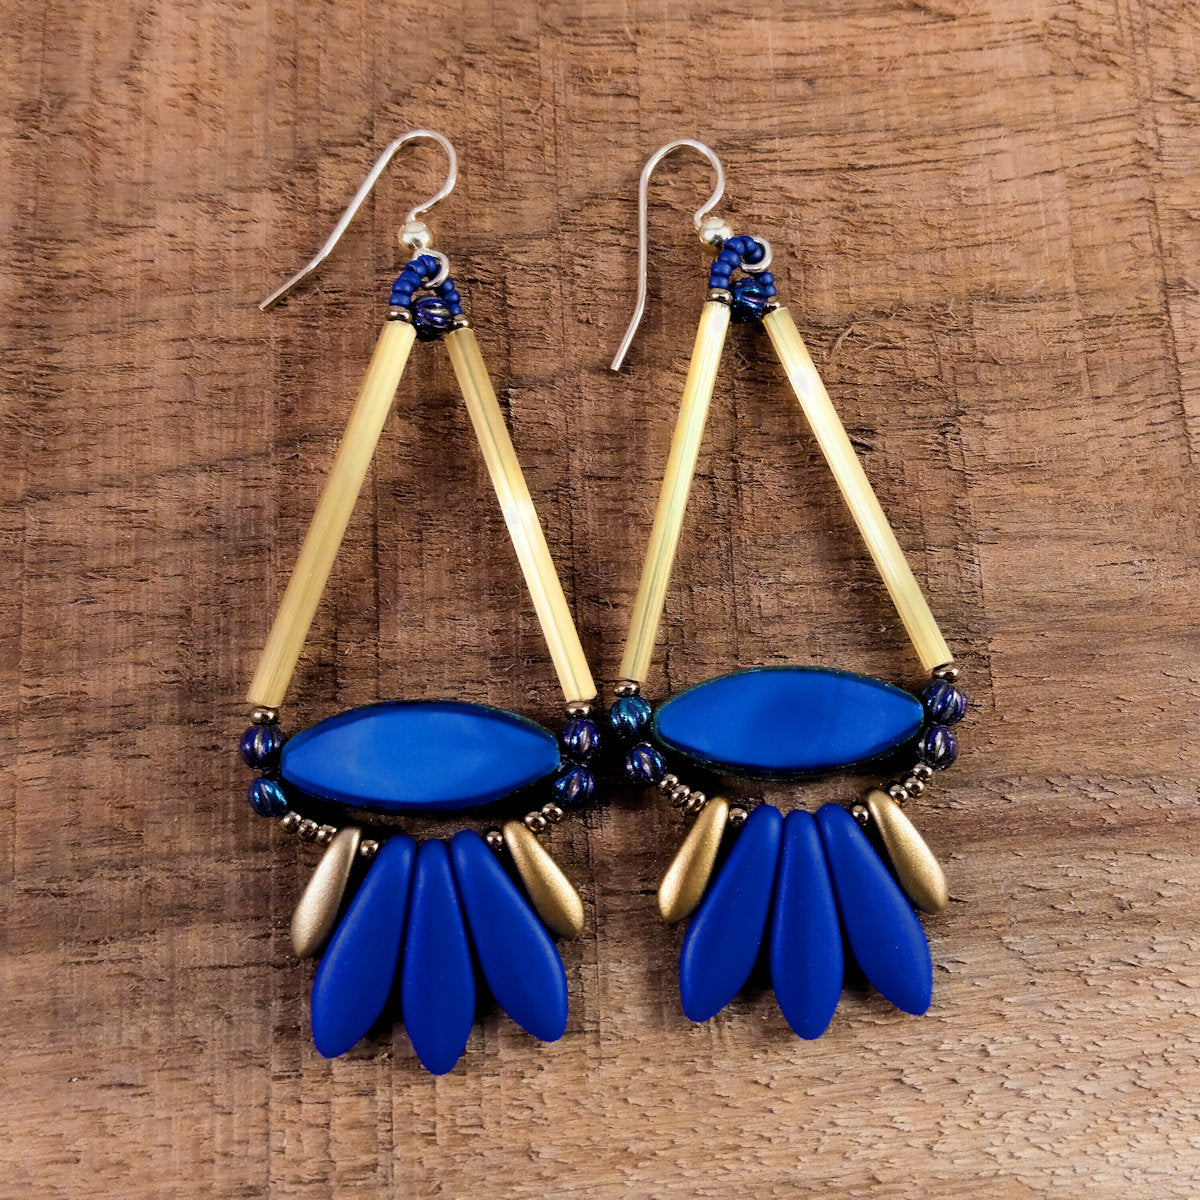 Triangle shaped earrings with a blue and gold fringe lay on a wood background. The earrings have gold ear wires. The triangle shape of the earrings is formed by gold tubes on the upper two sides and a flat blue pointed oval bead at the base. The fringe below the triangle shape is formed with three matte blue daggers sandwiched between smaller gold daggers. 